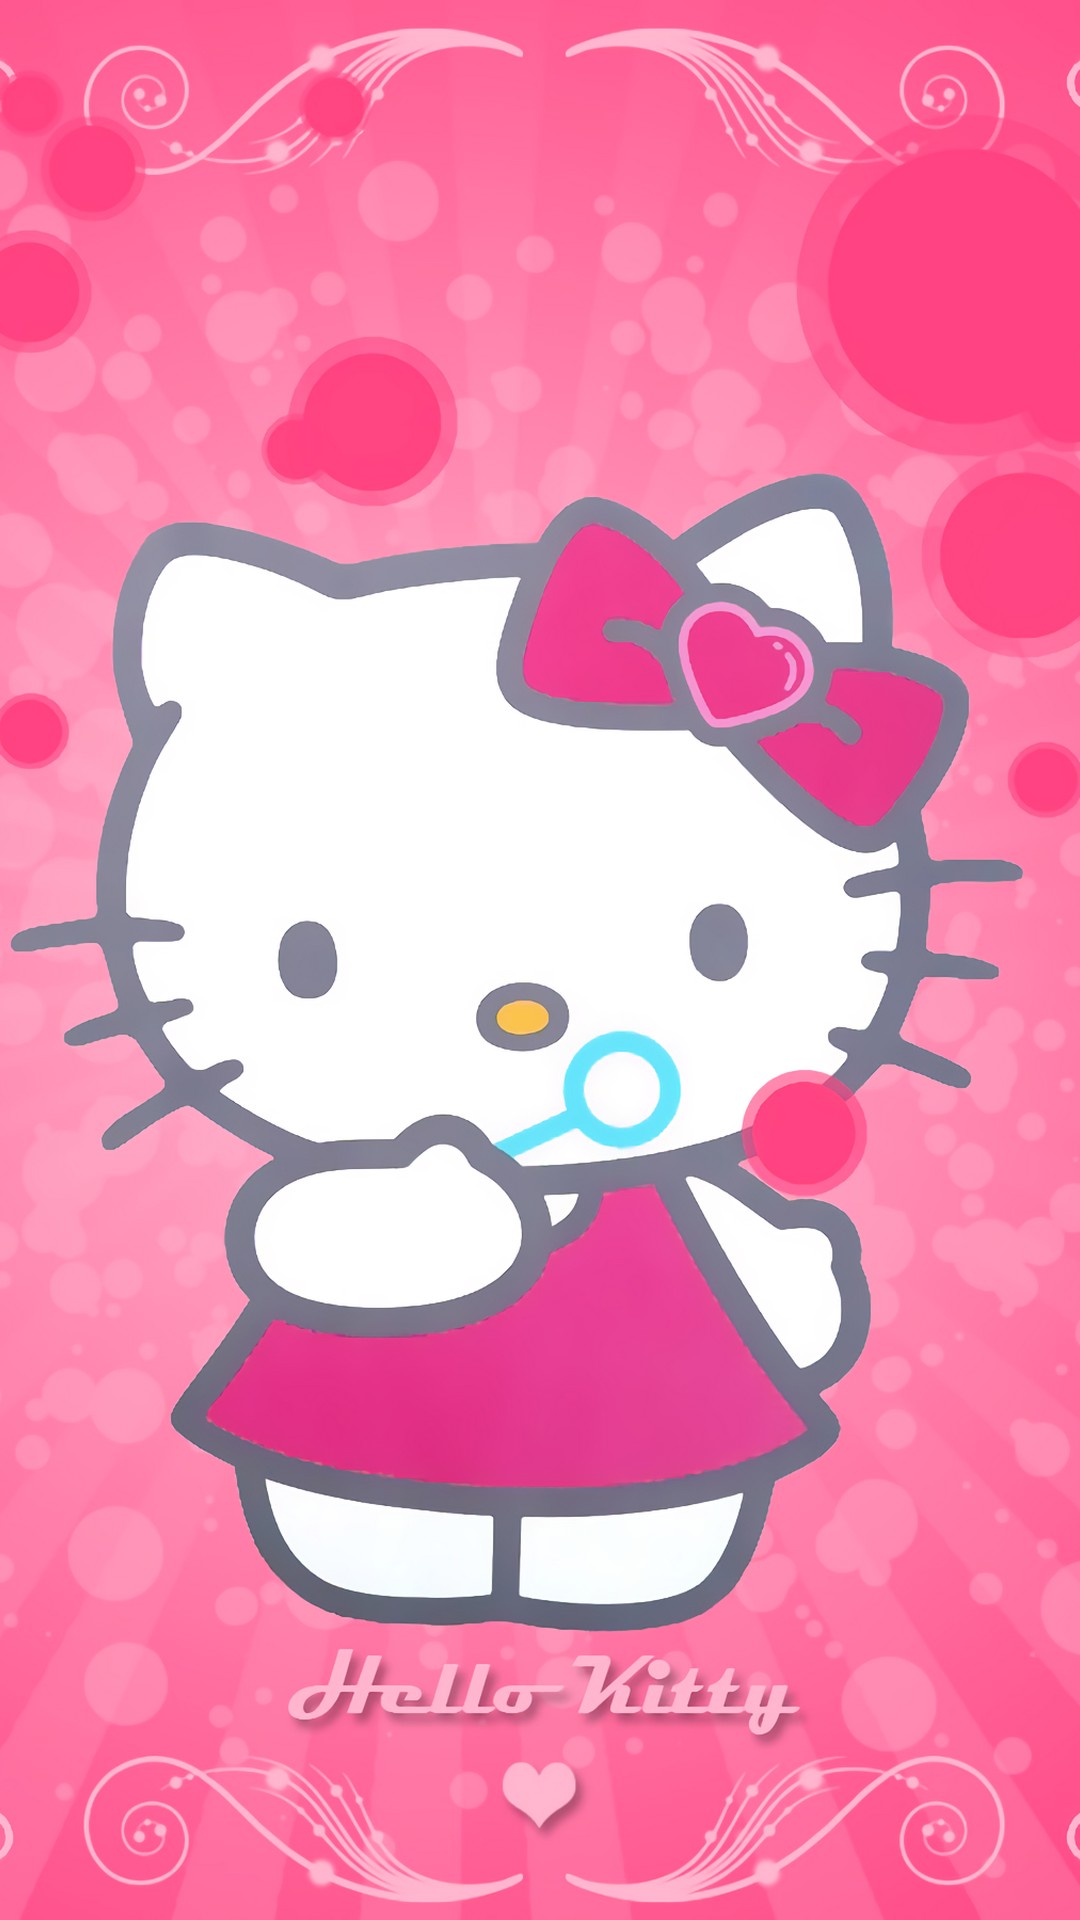 Hello Kitty Wallpaper iPhone HD with resolution 1080X1920 pixel. You can use this wallpaper as background for your desktop Computer Screensavers, Android or iPhone smartphones